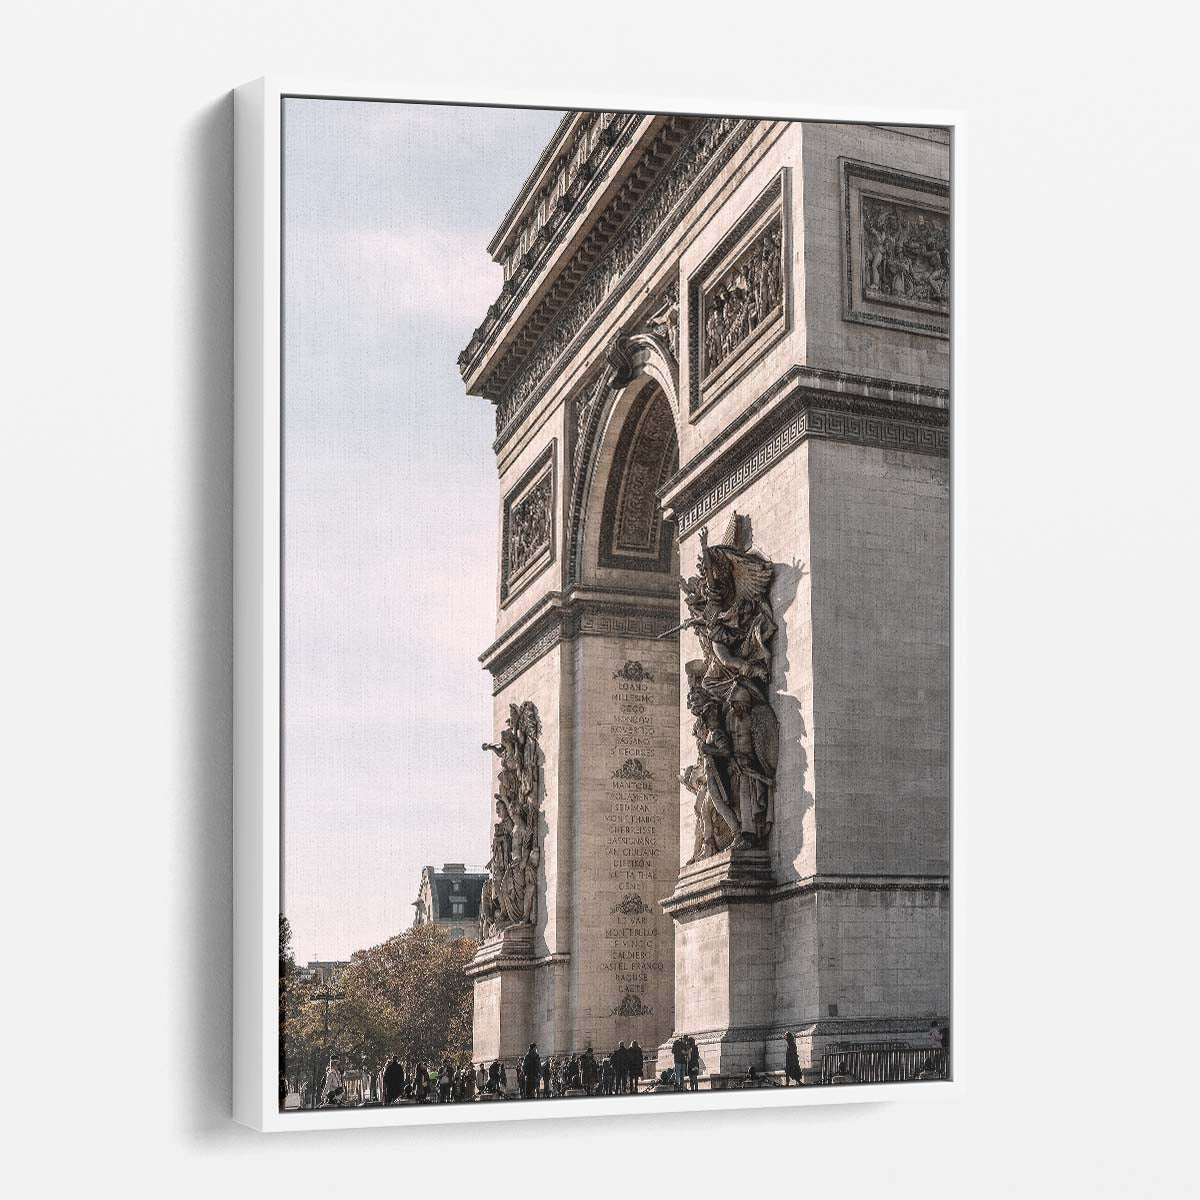 Paris Arc de Triomphe Iconic Architecture Photography Wall Art by Luxuriance Designs, made in USA